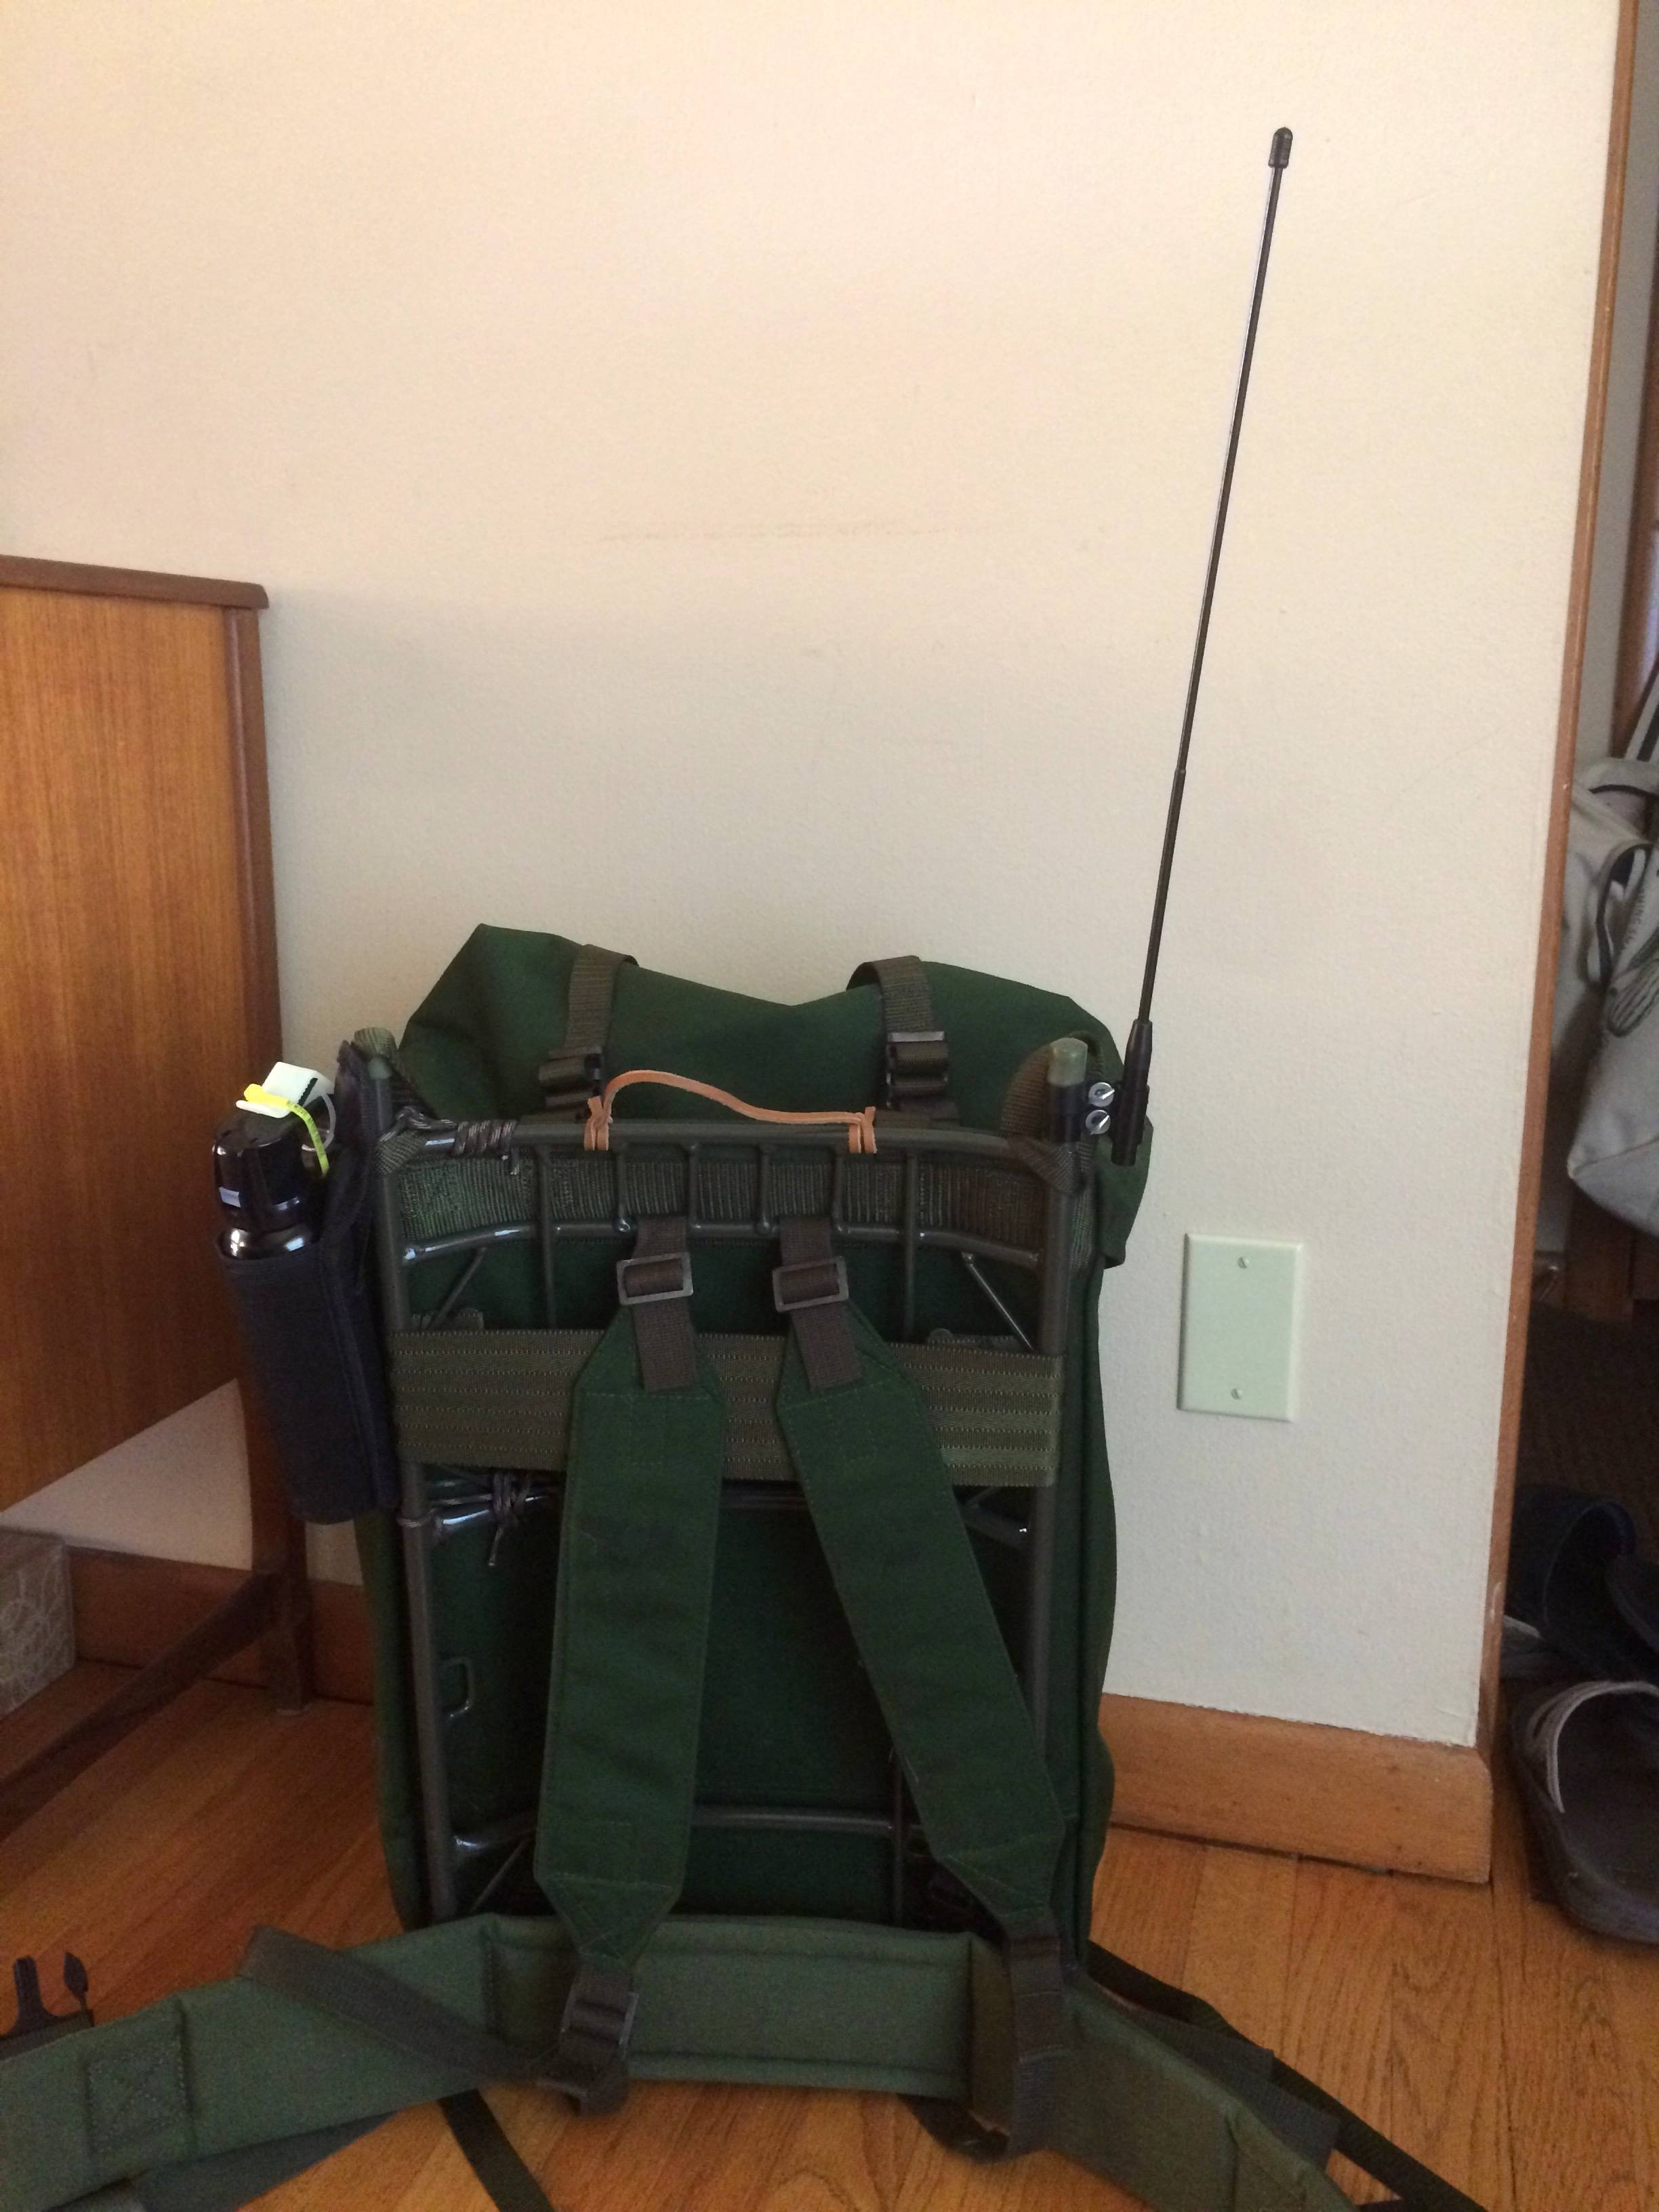 backpack with Diamond whip antenna